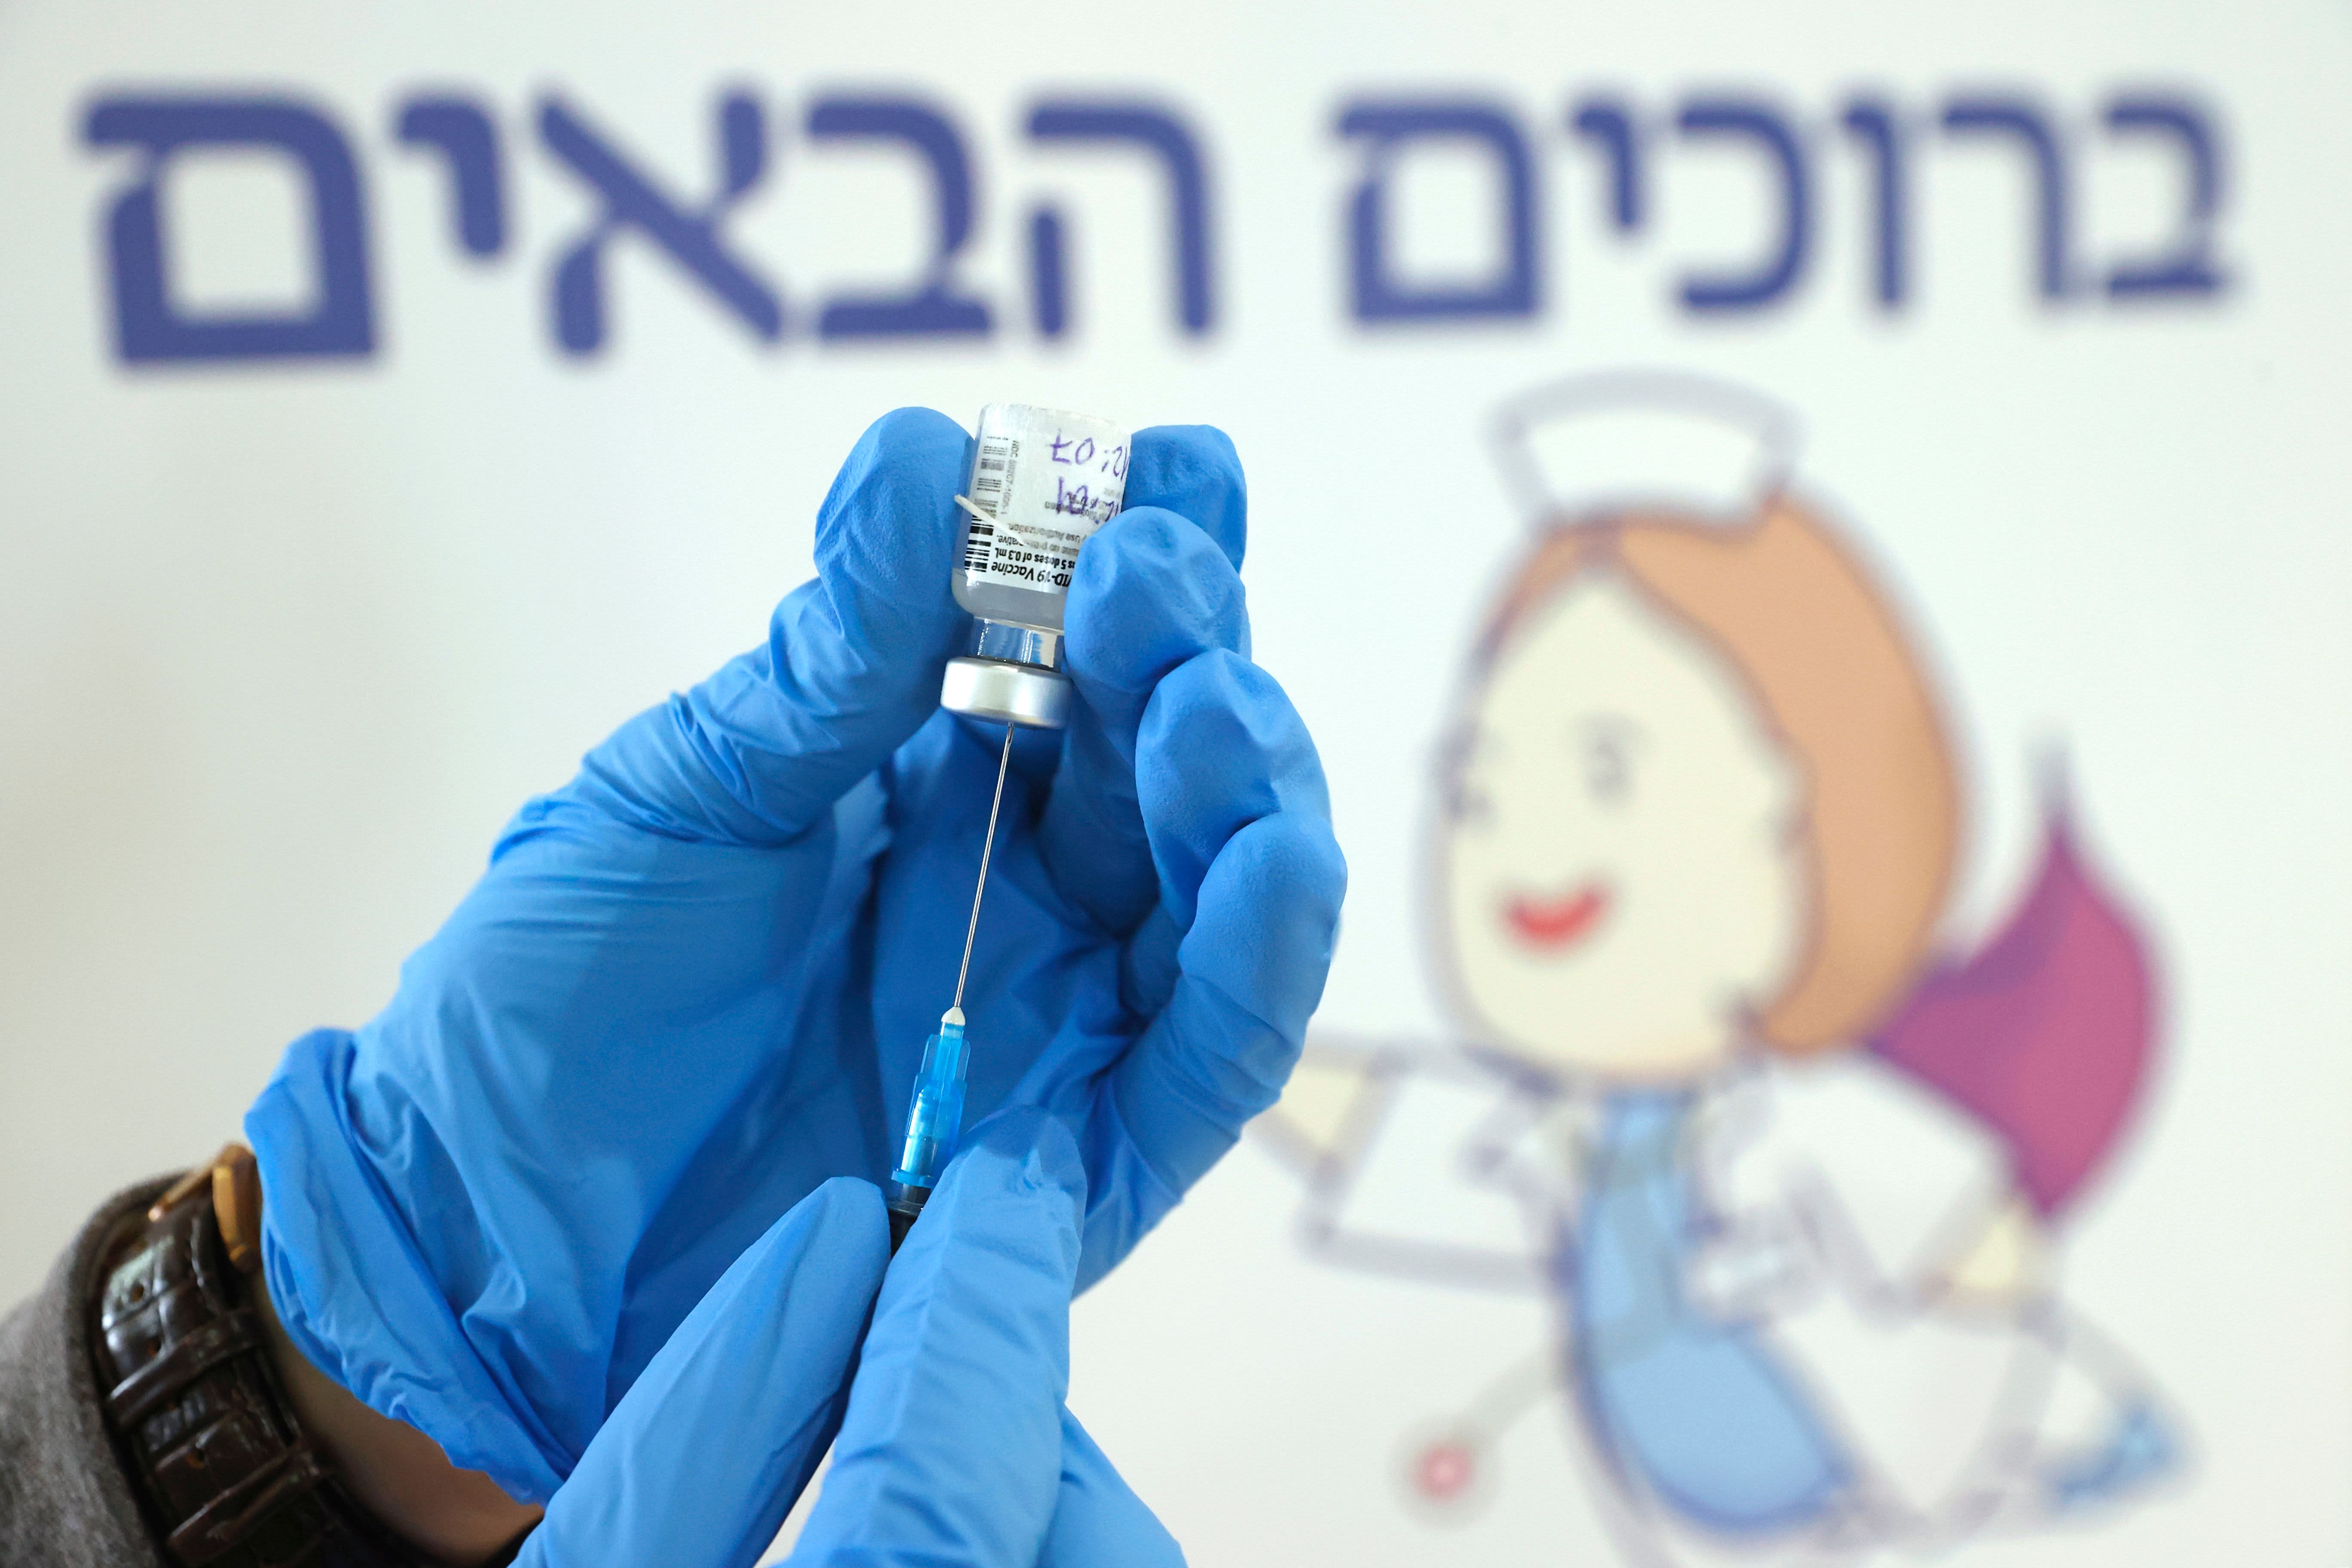 Covid variant from South Africa managed to “break” Pfizer vaccine in Israeli study